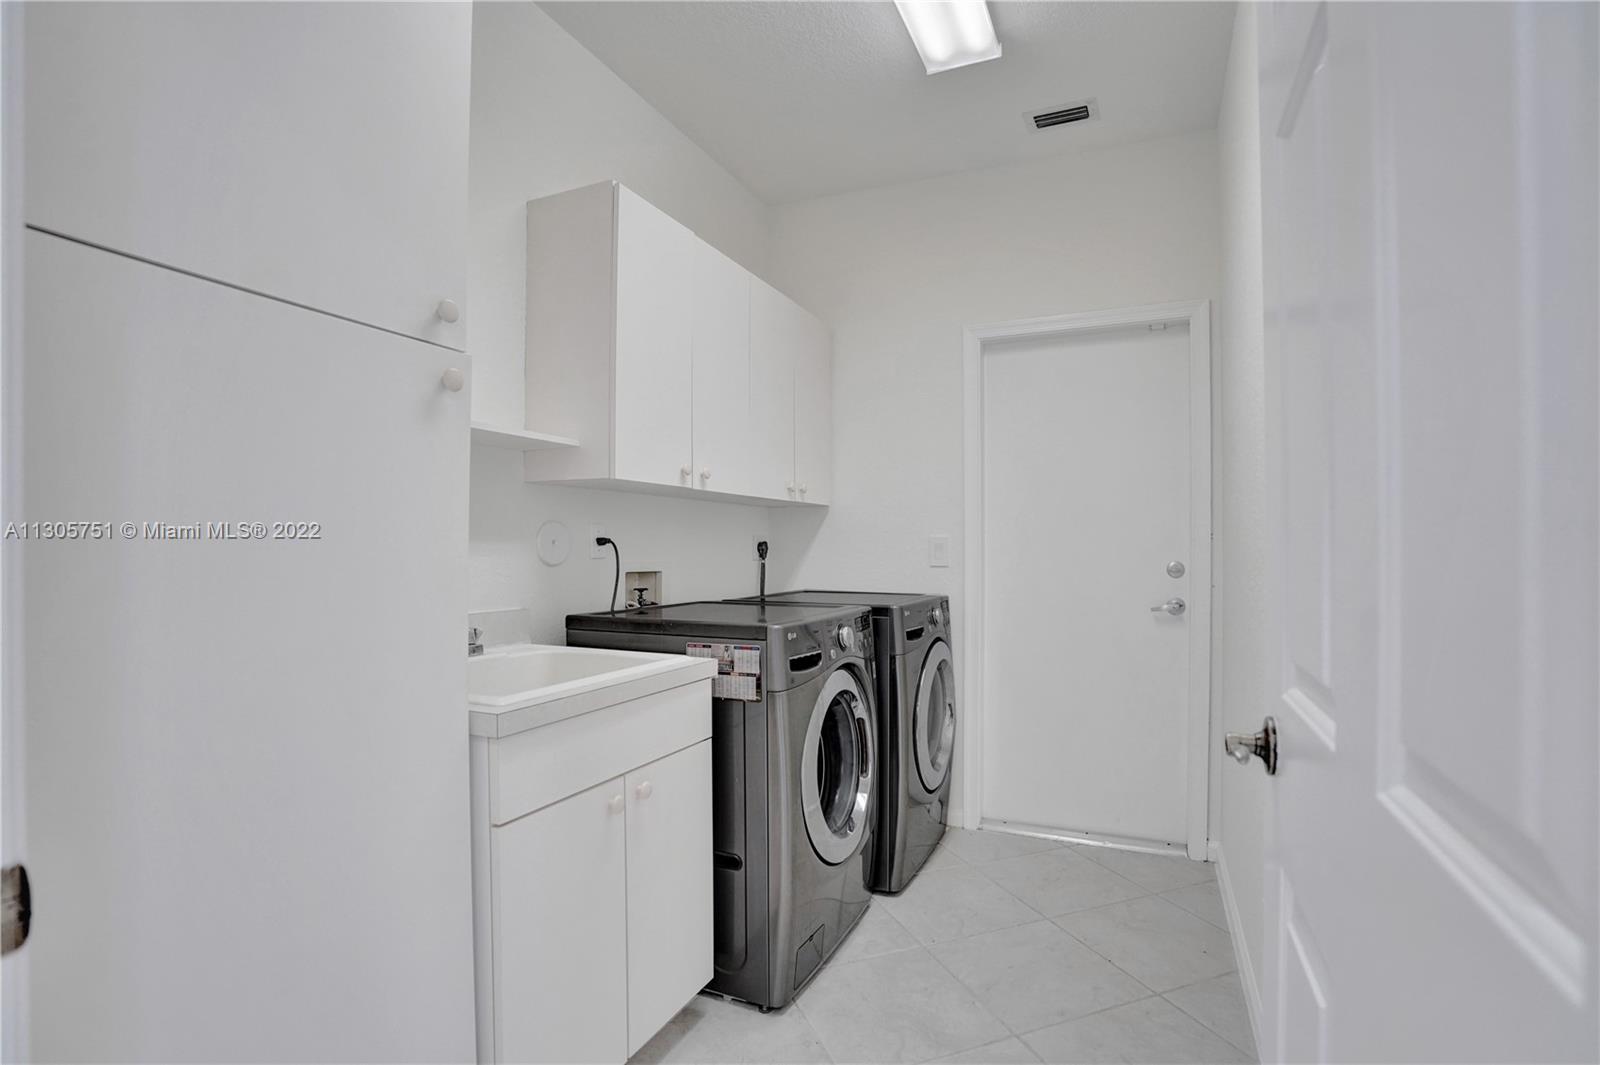 Spacious laundry room with stainless front load washer and dryer, built in sink and lots of storage cabinetry. Also freshly painted.